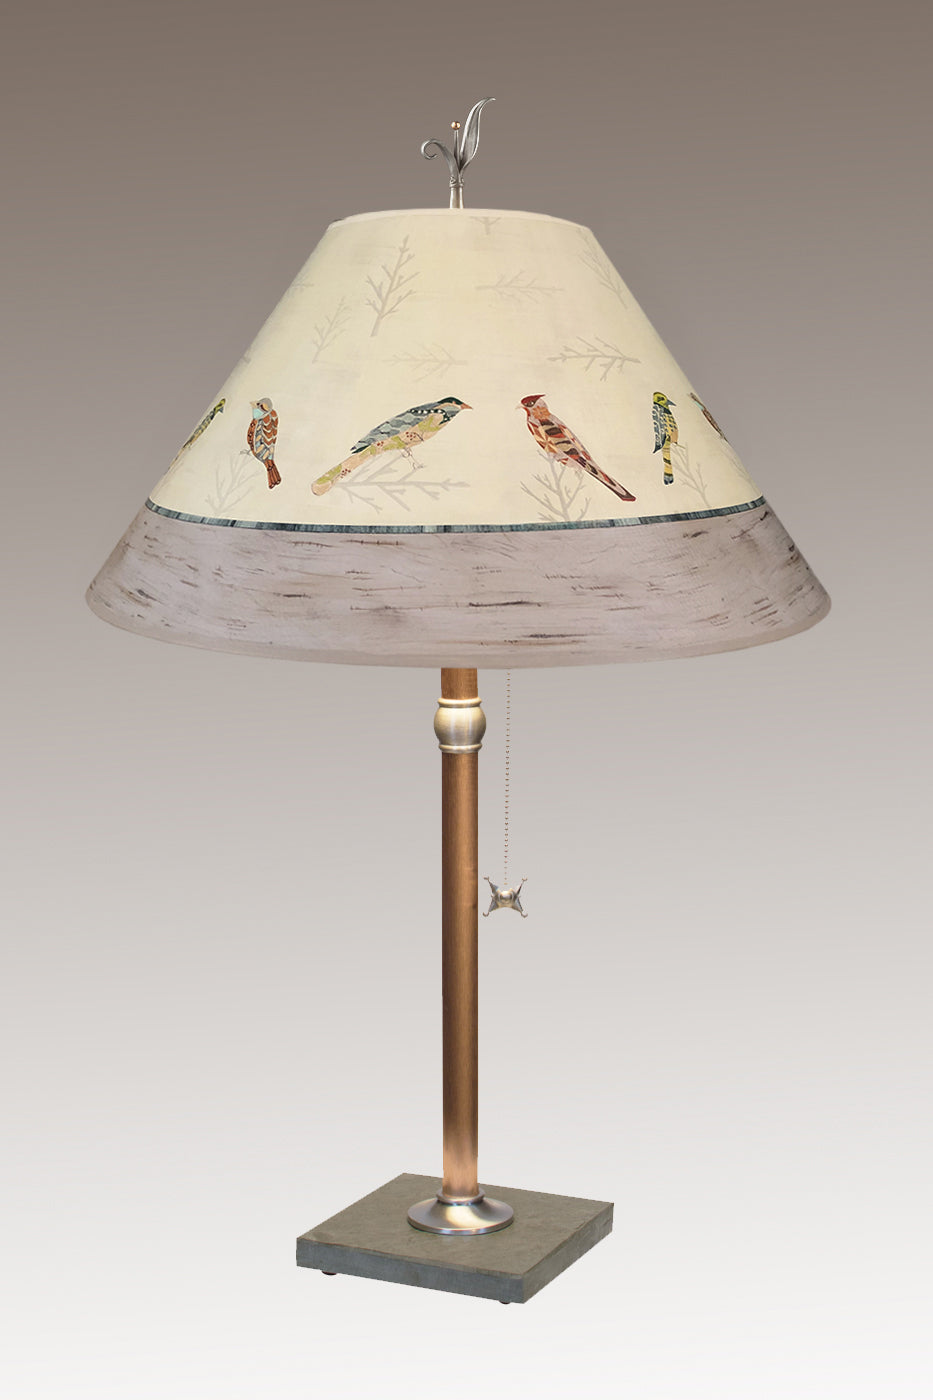 Copper Table Lamp with Large Conical Shade in Bird Friends